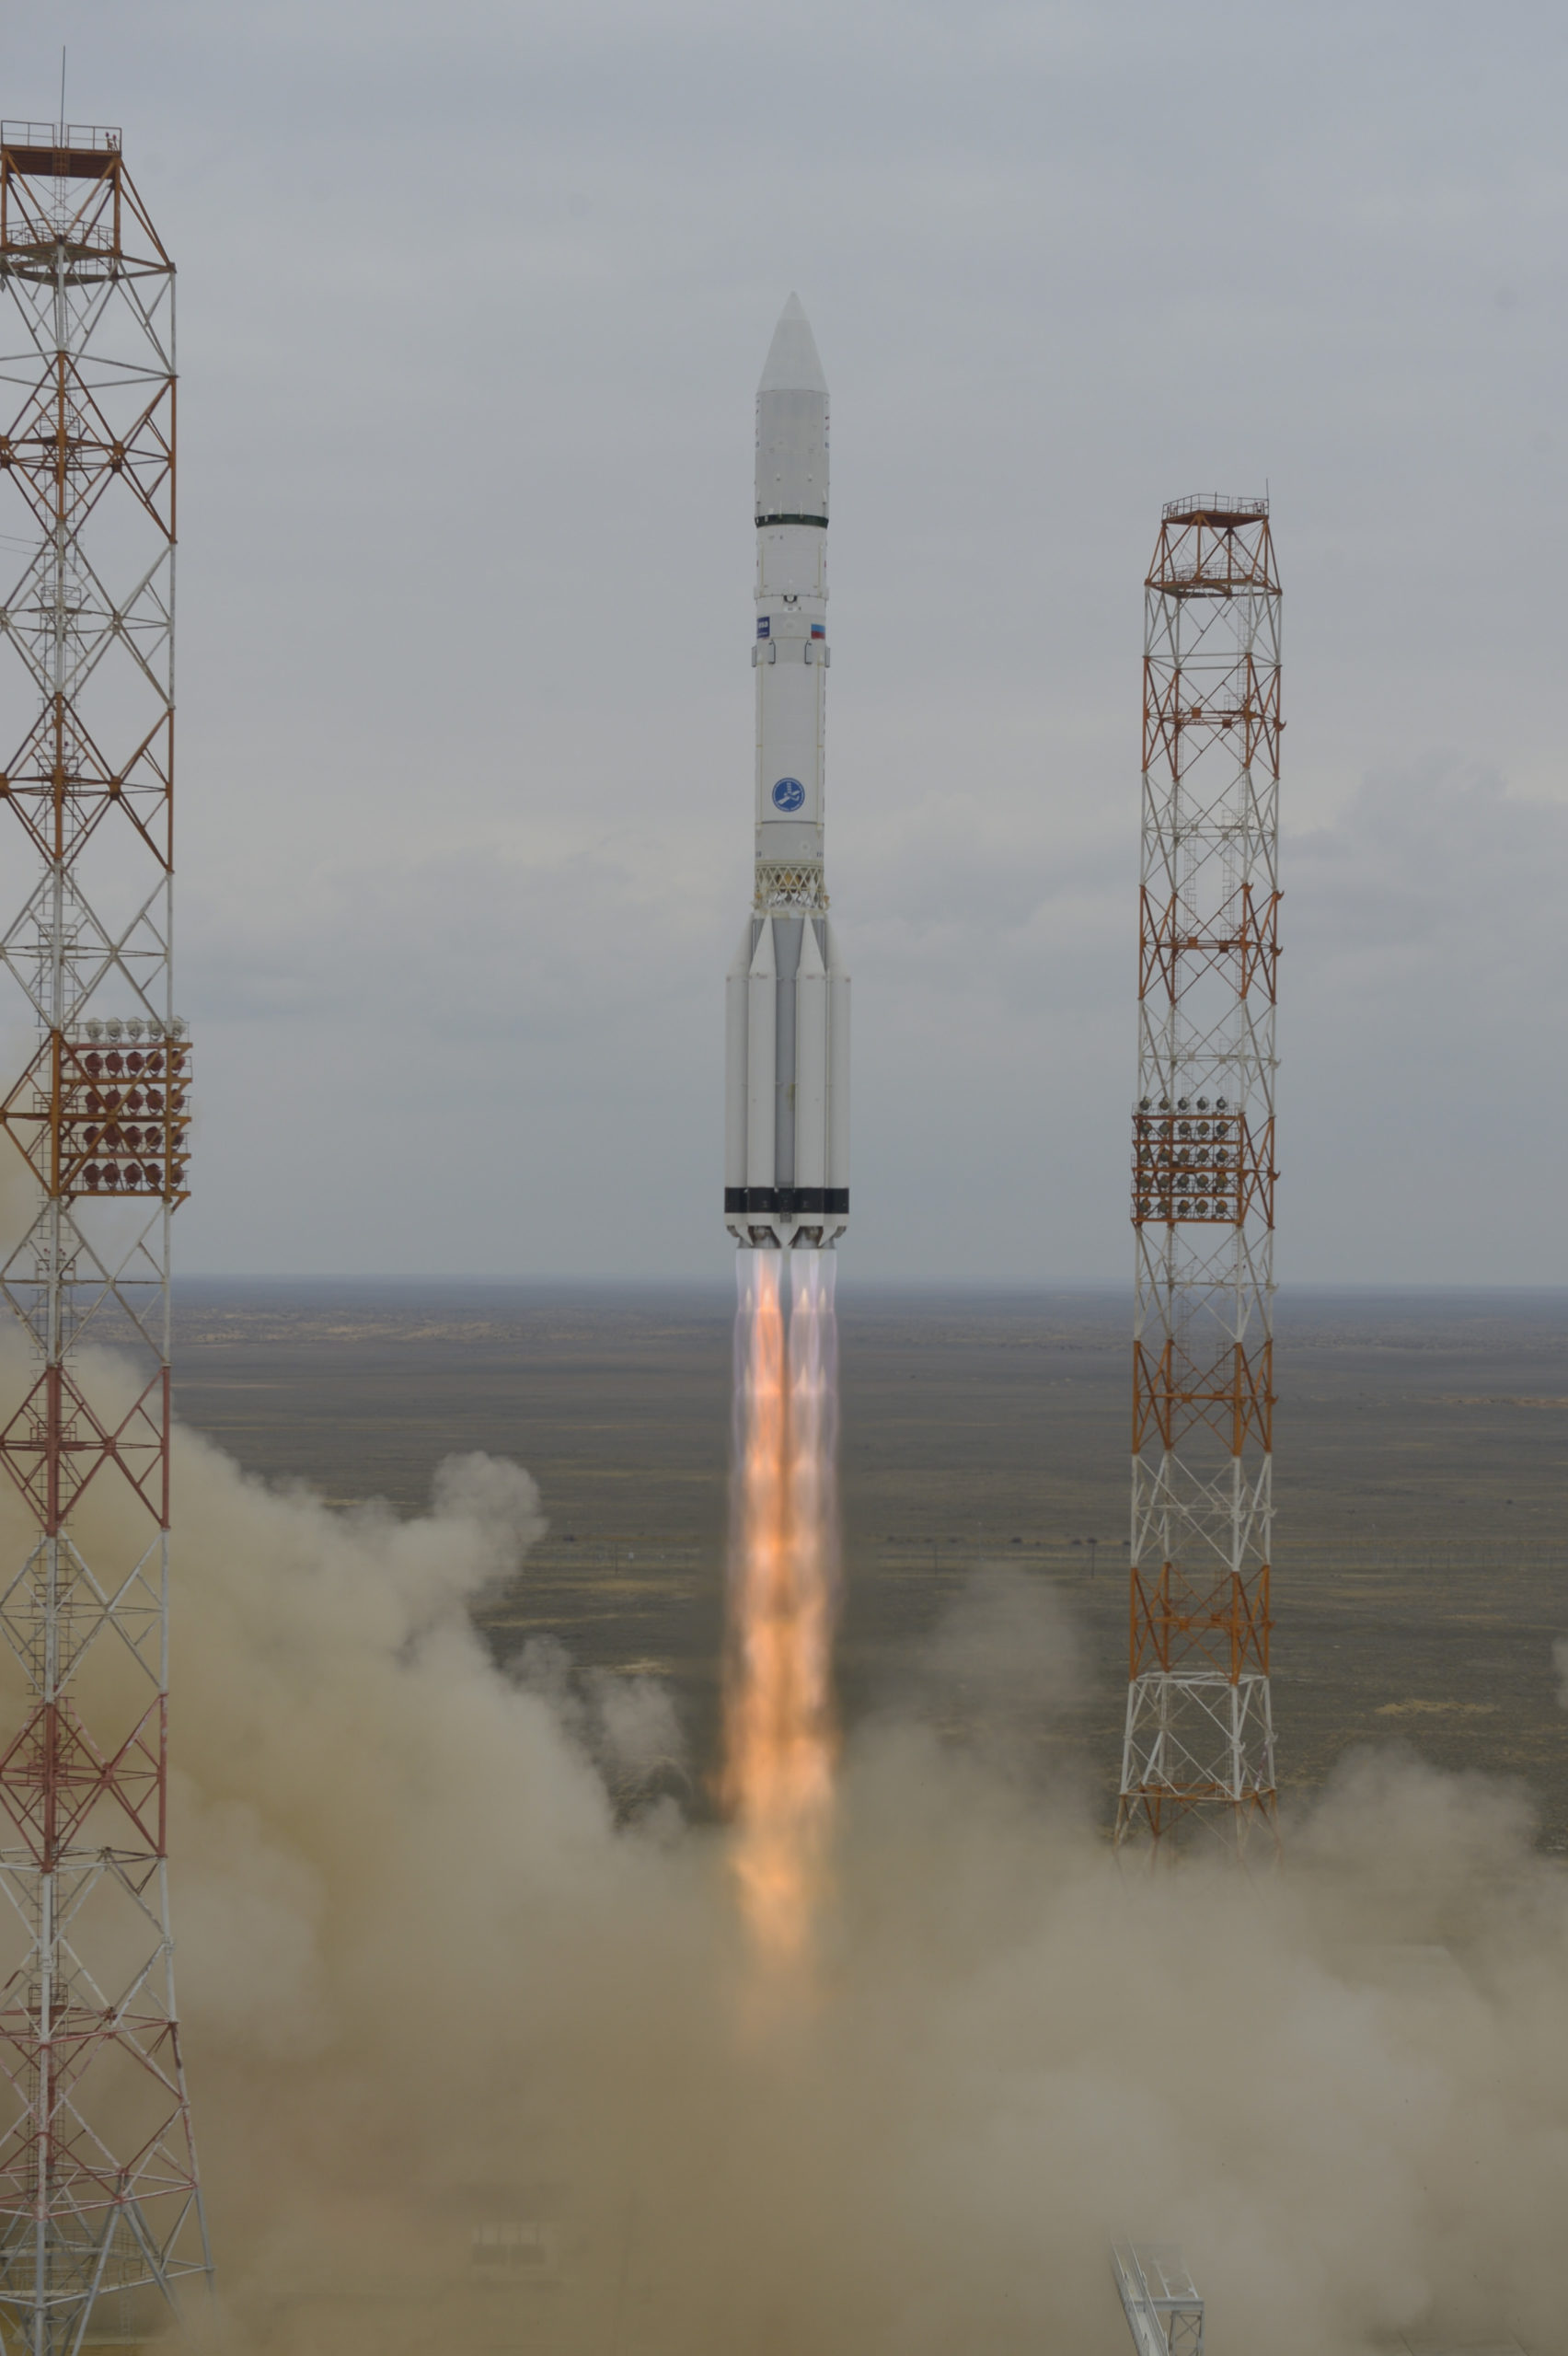 The ExoMars Launch Was A Resounding Success